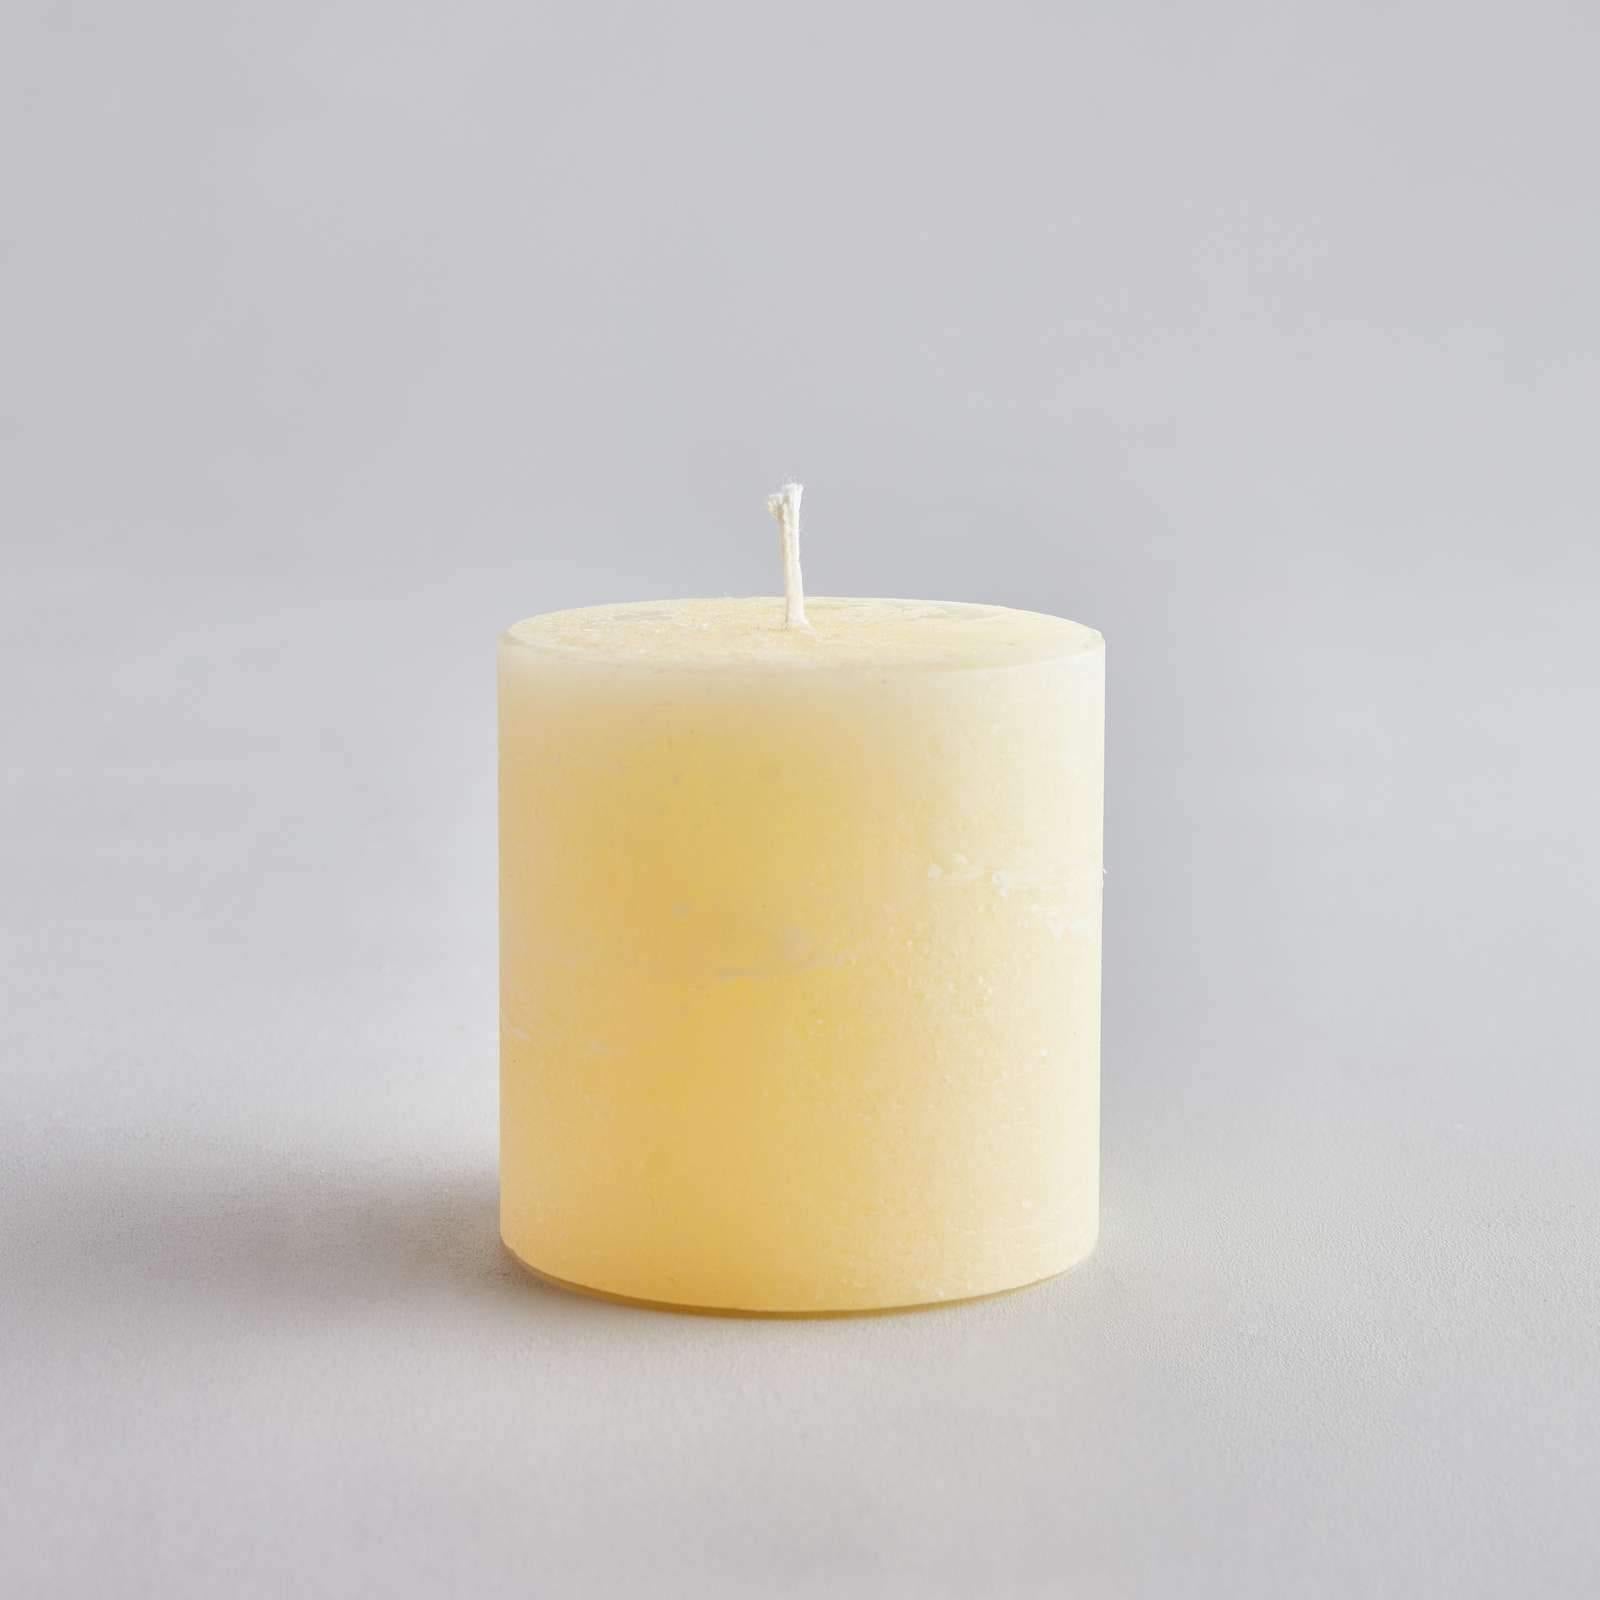 Bay & Rosemary Scented 3" x 3" Pillar Candle - Smallhill Furniture Co.